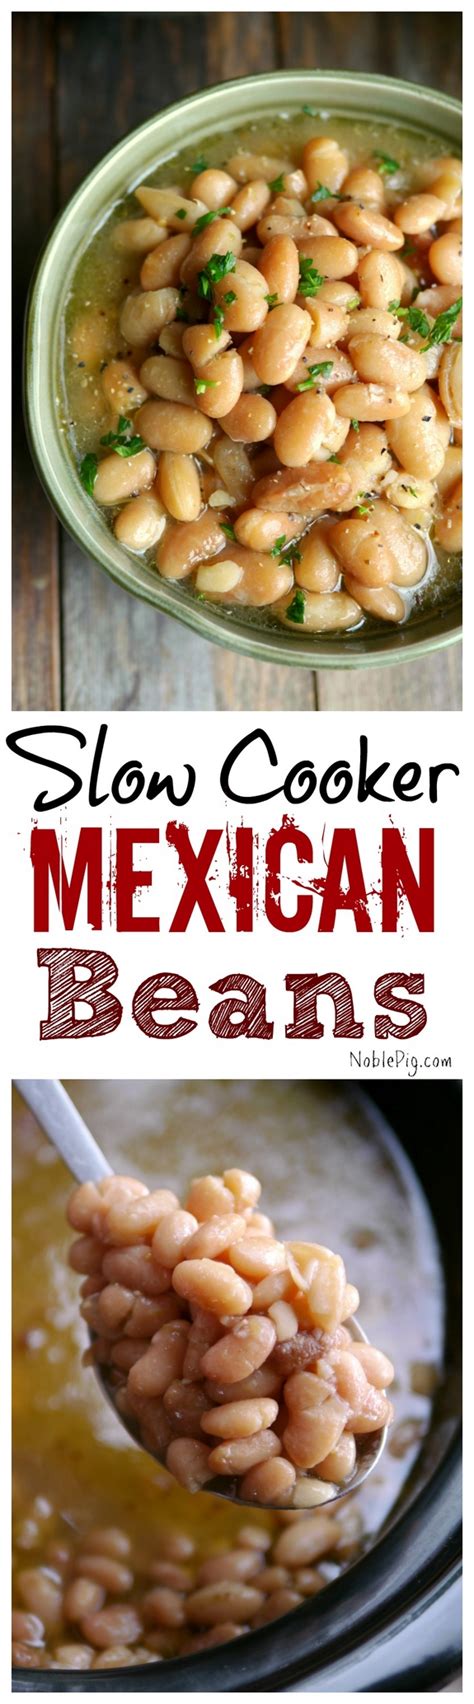 This recipe comes together easily and effortlessly! Slow Cooker Mexican Beans